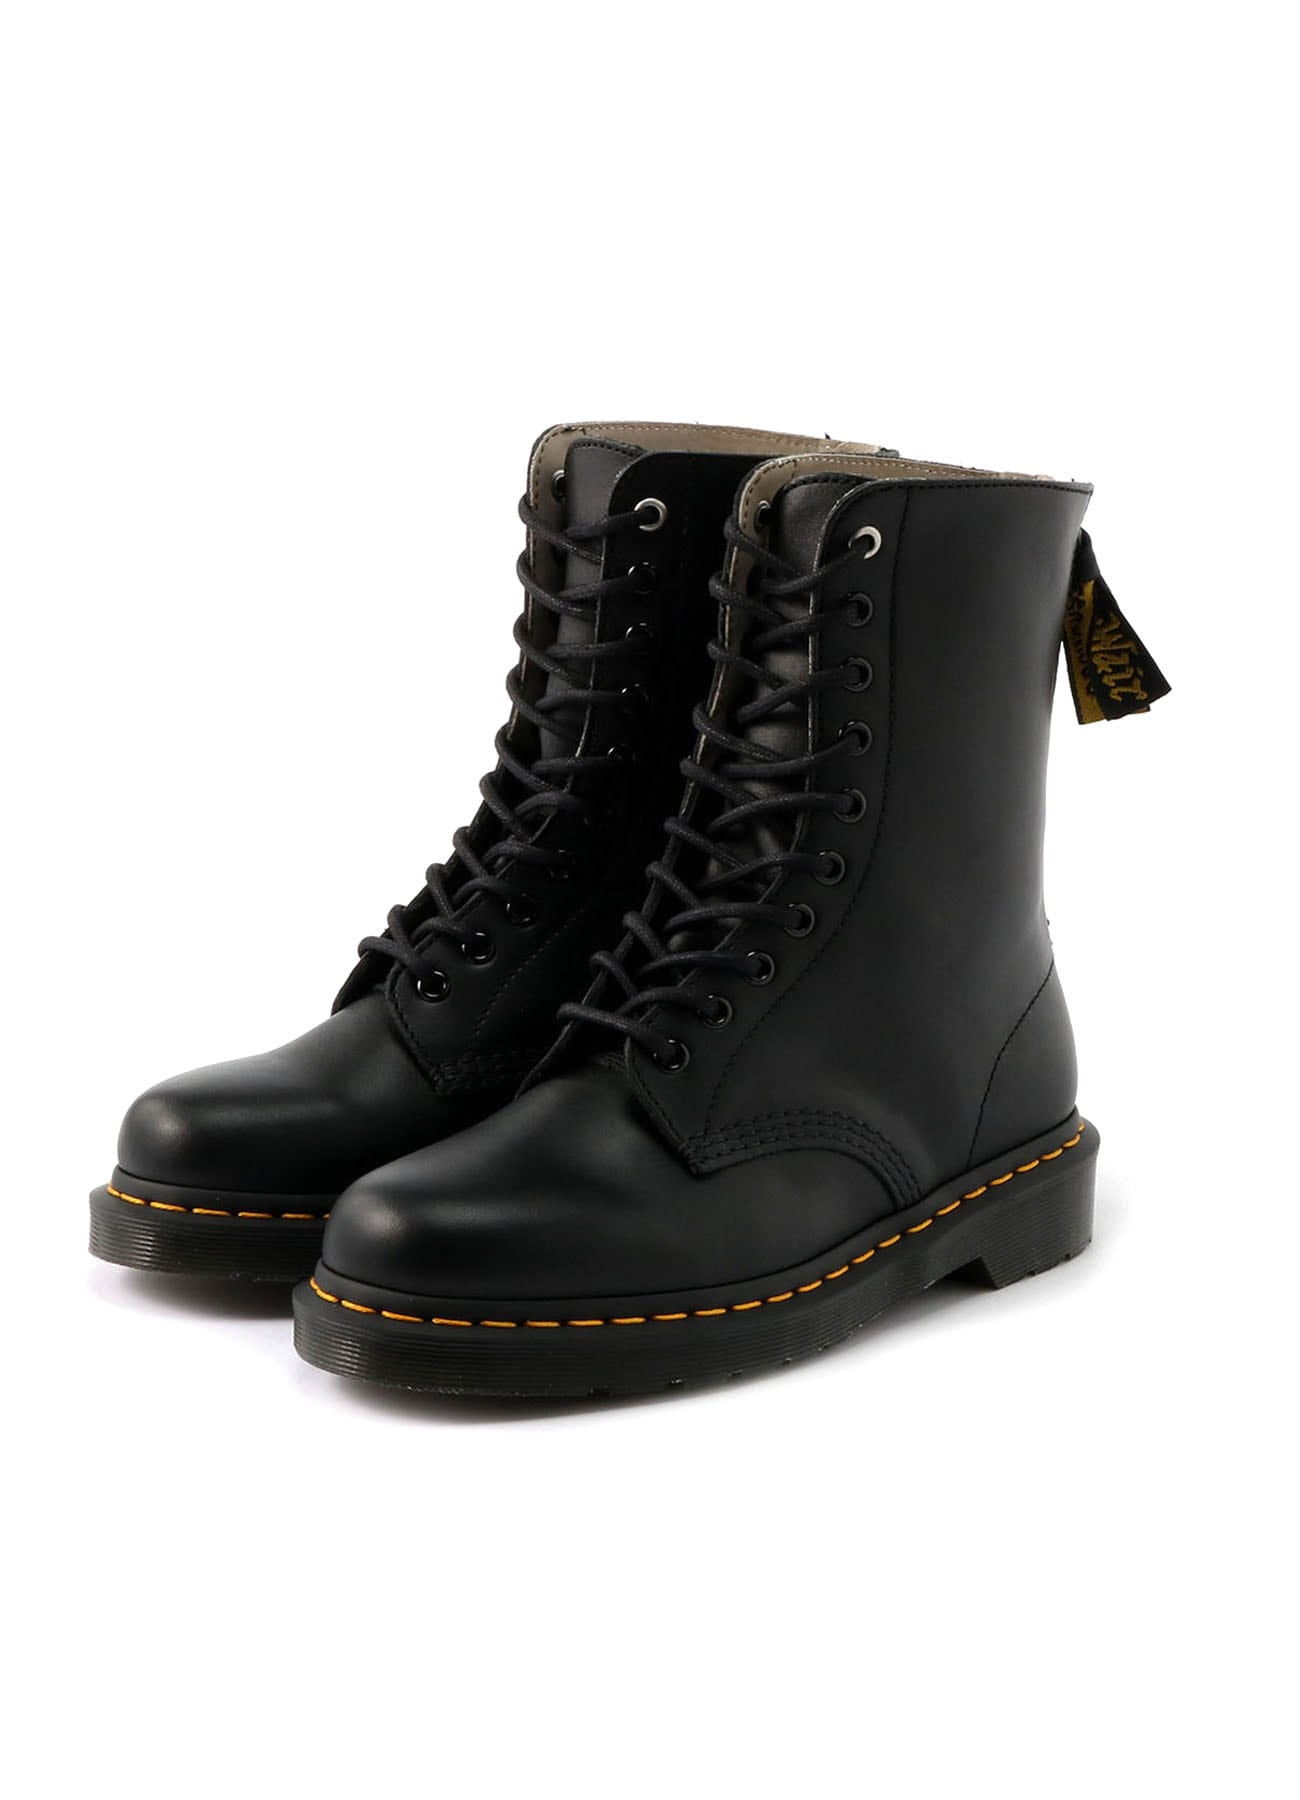 Y's x Dr.Martens 10EYE BOOT